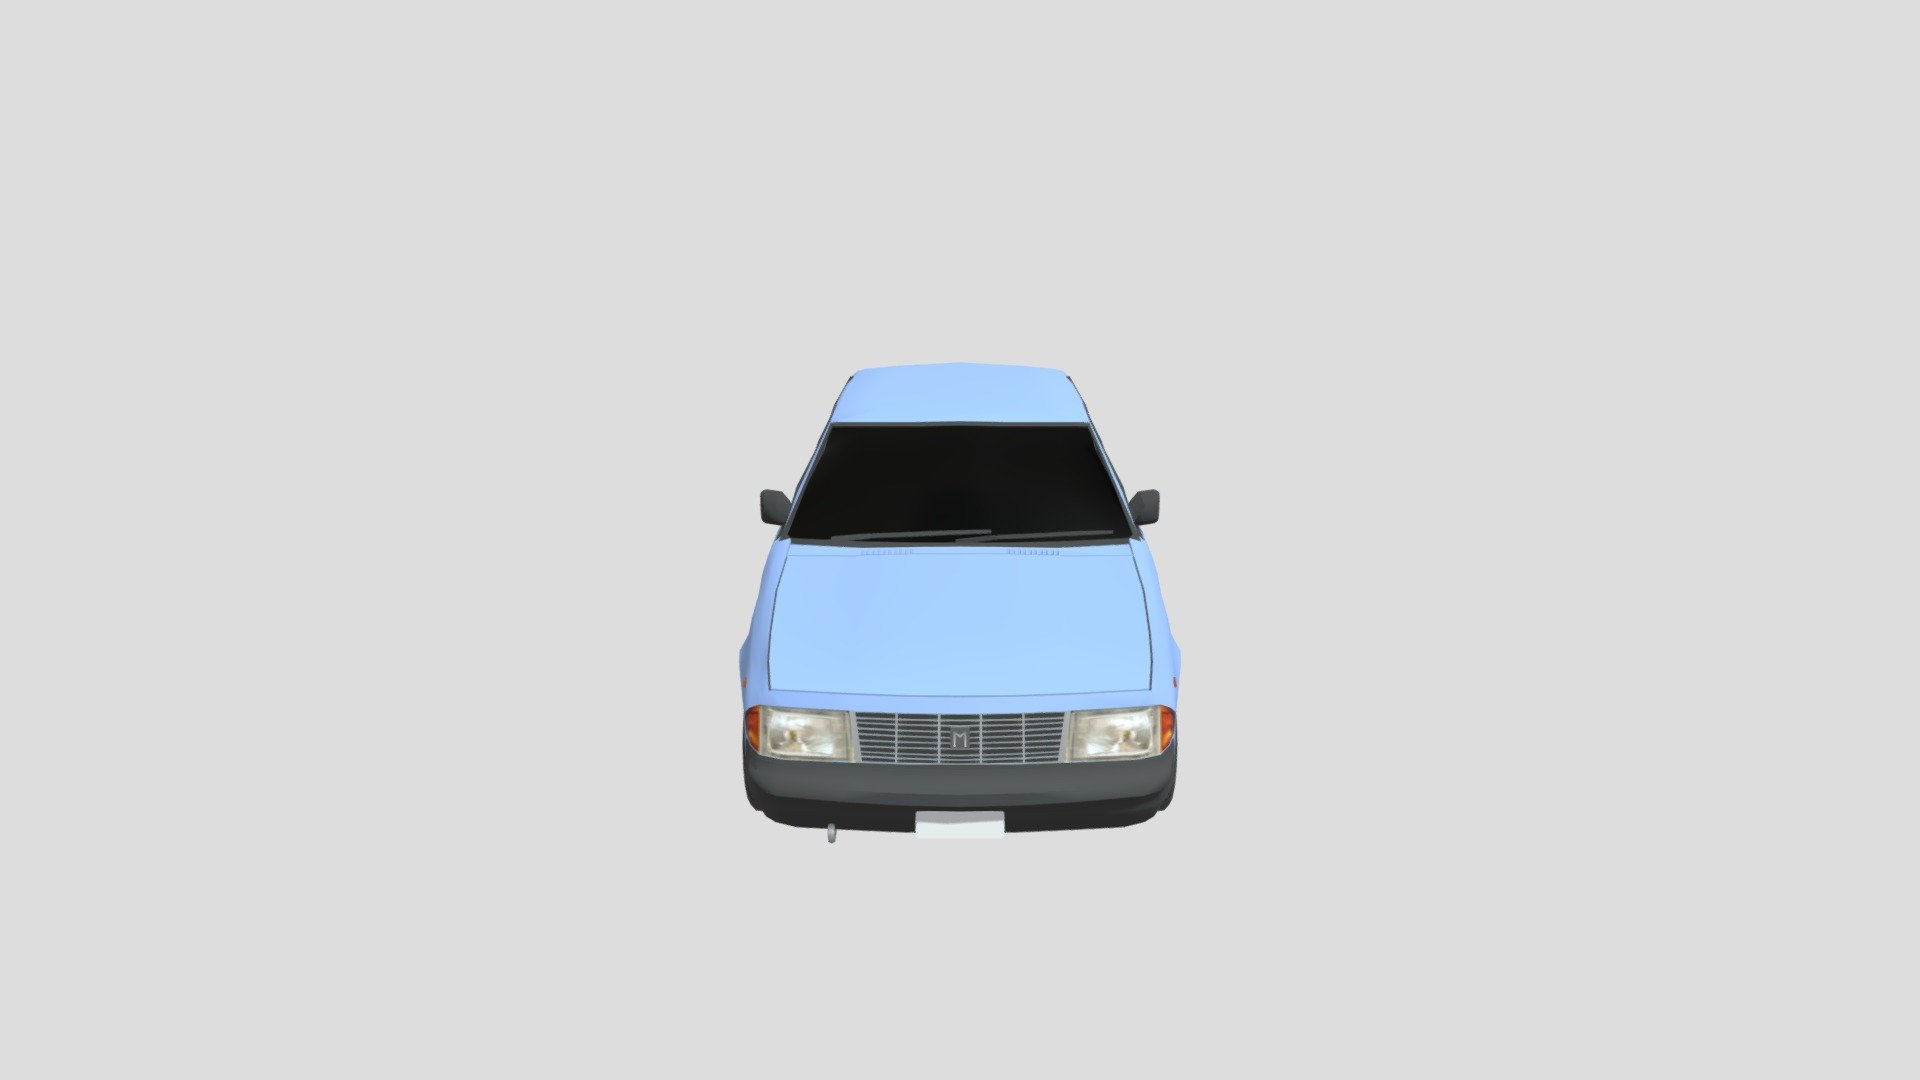 Another car on this account, I think the next thing I will do will be something low-poly, or some object.
I hope you liked this model.

My YouTube - https://www.youtube.com/channel/UCEBIvixj_xUDQuL5EJDCLAw

In general, a video about how I made UAZ was supposed to be released on the channel, but the editing program had its own plans 3d model